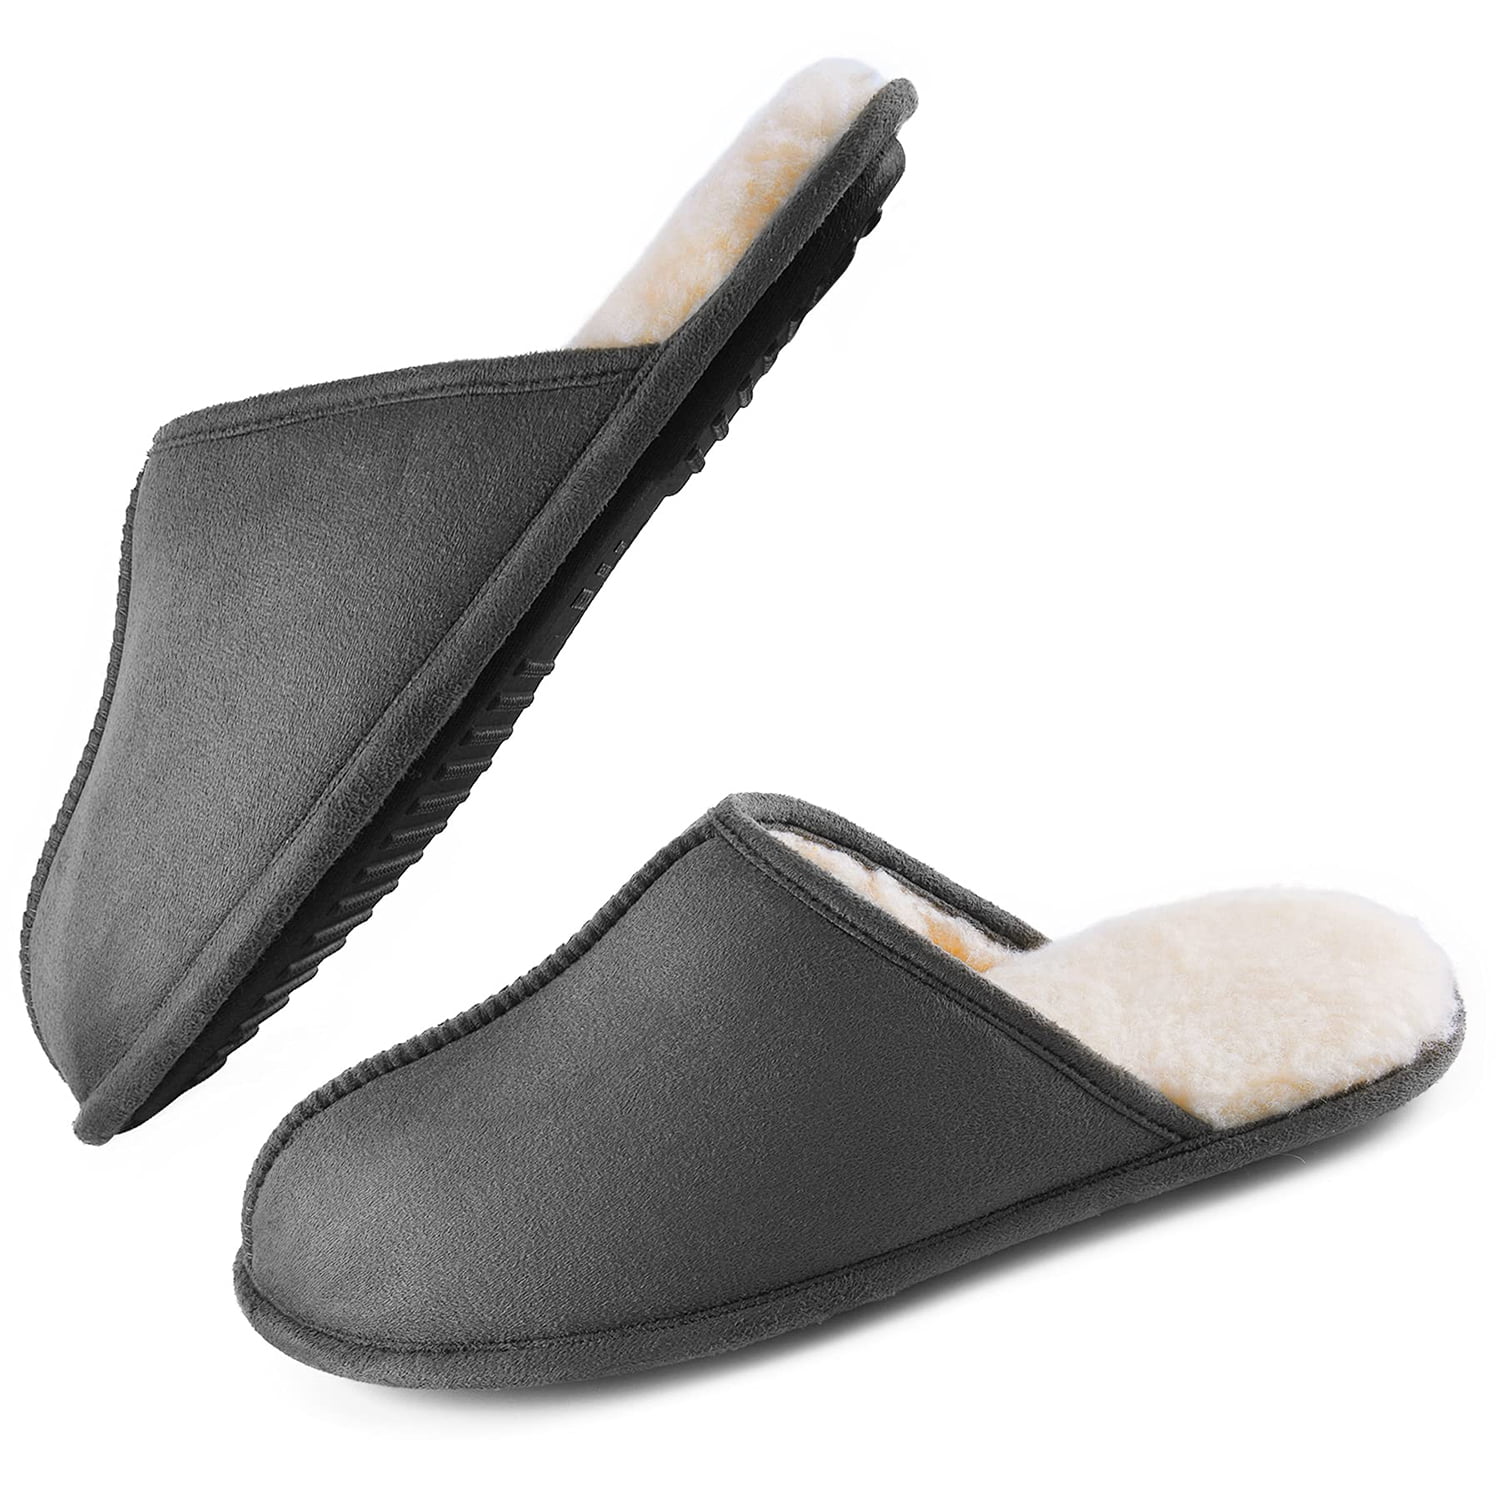 Mens Mule Slippers Ben Sherman Soft Warm Padded Faux Fur Lined Outdoor Sole 